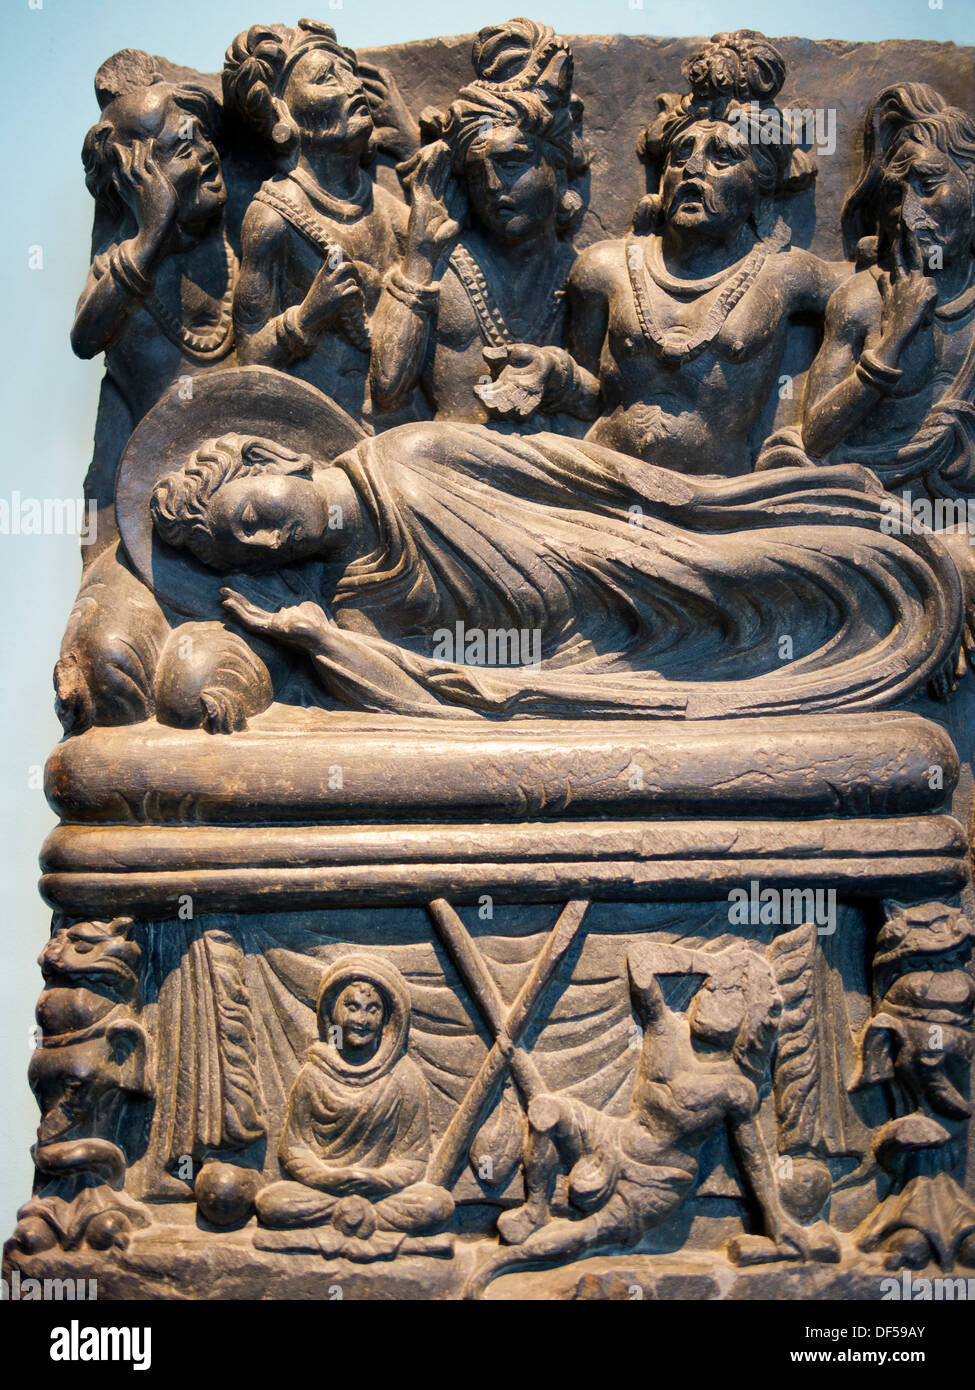 The Victoria and Albert Museum, London - Gandharan depiction of the death of the Buddha Stock Photo